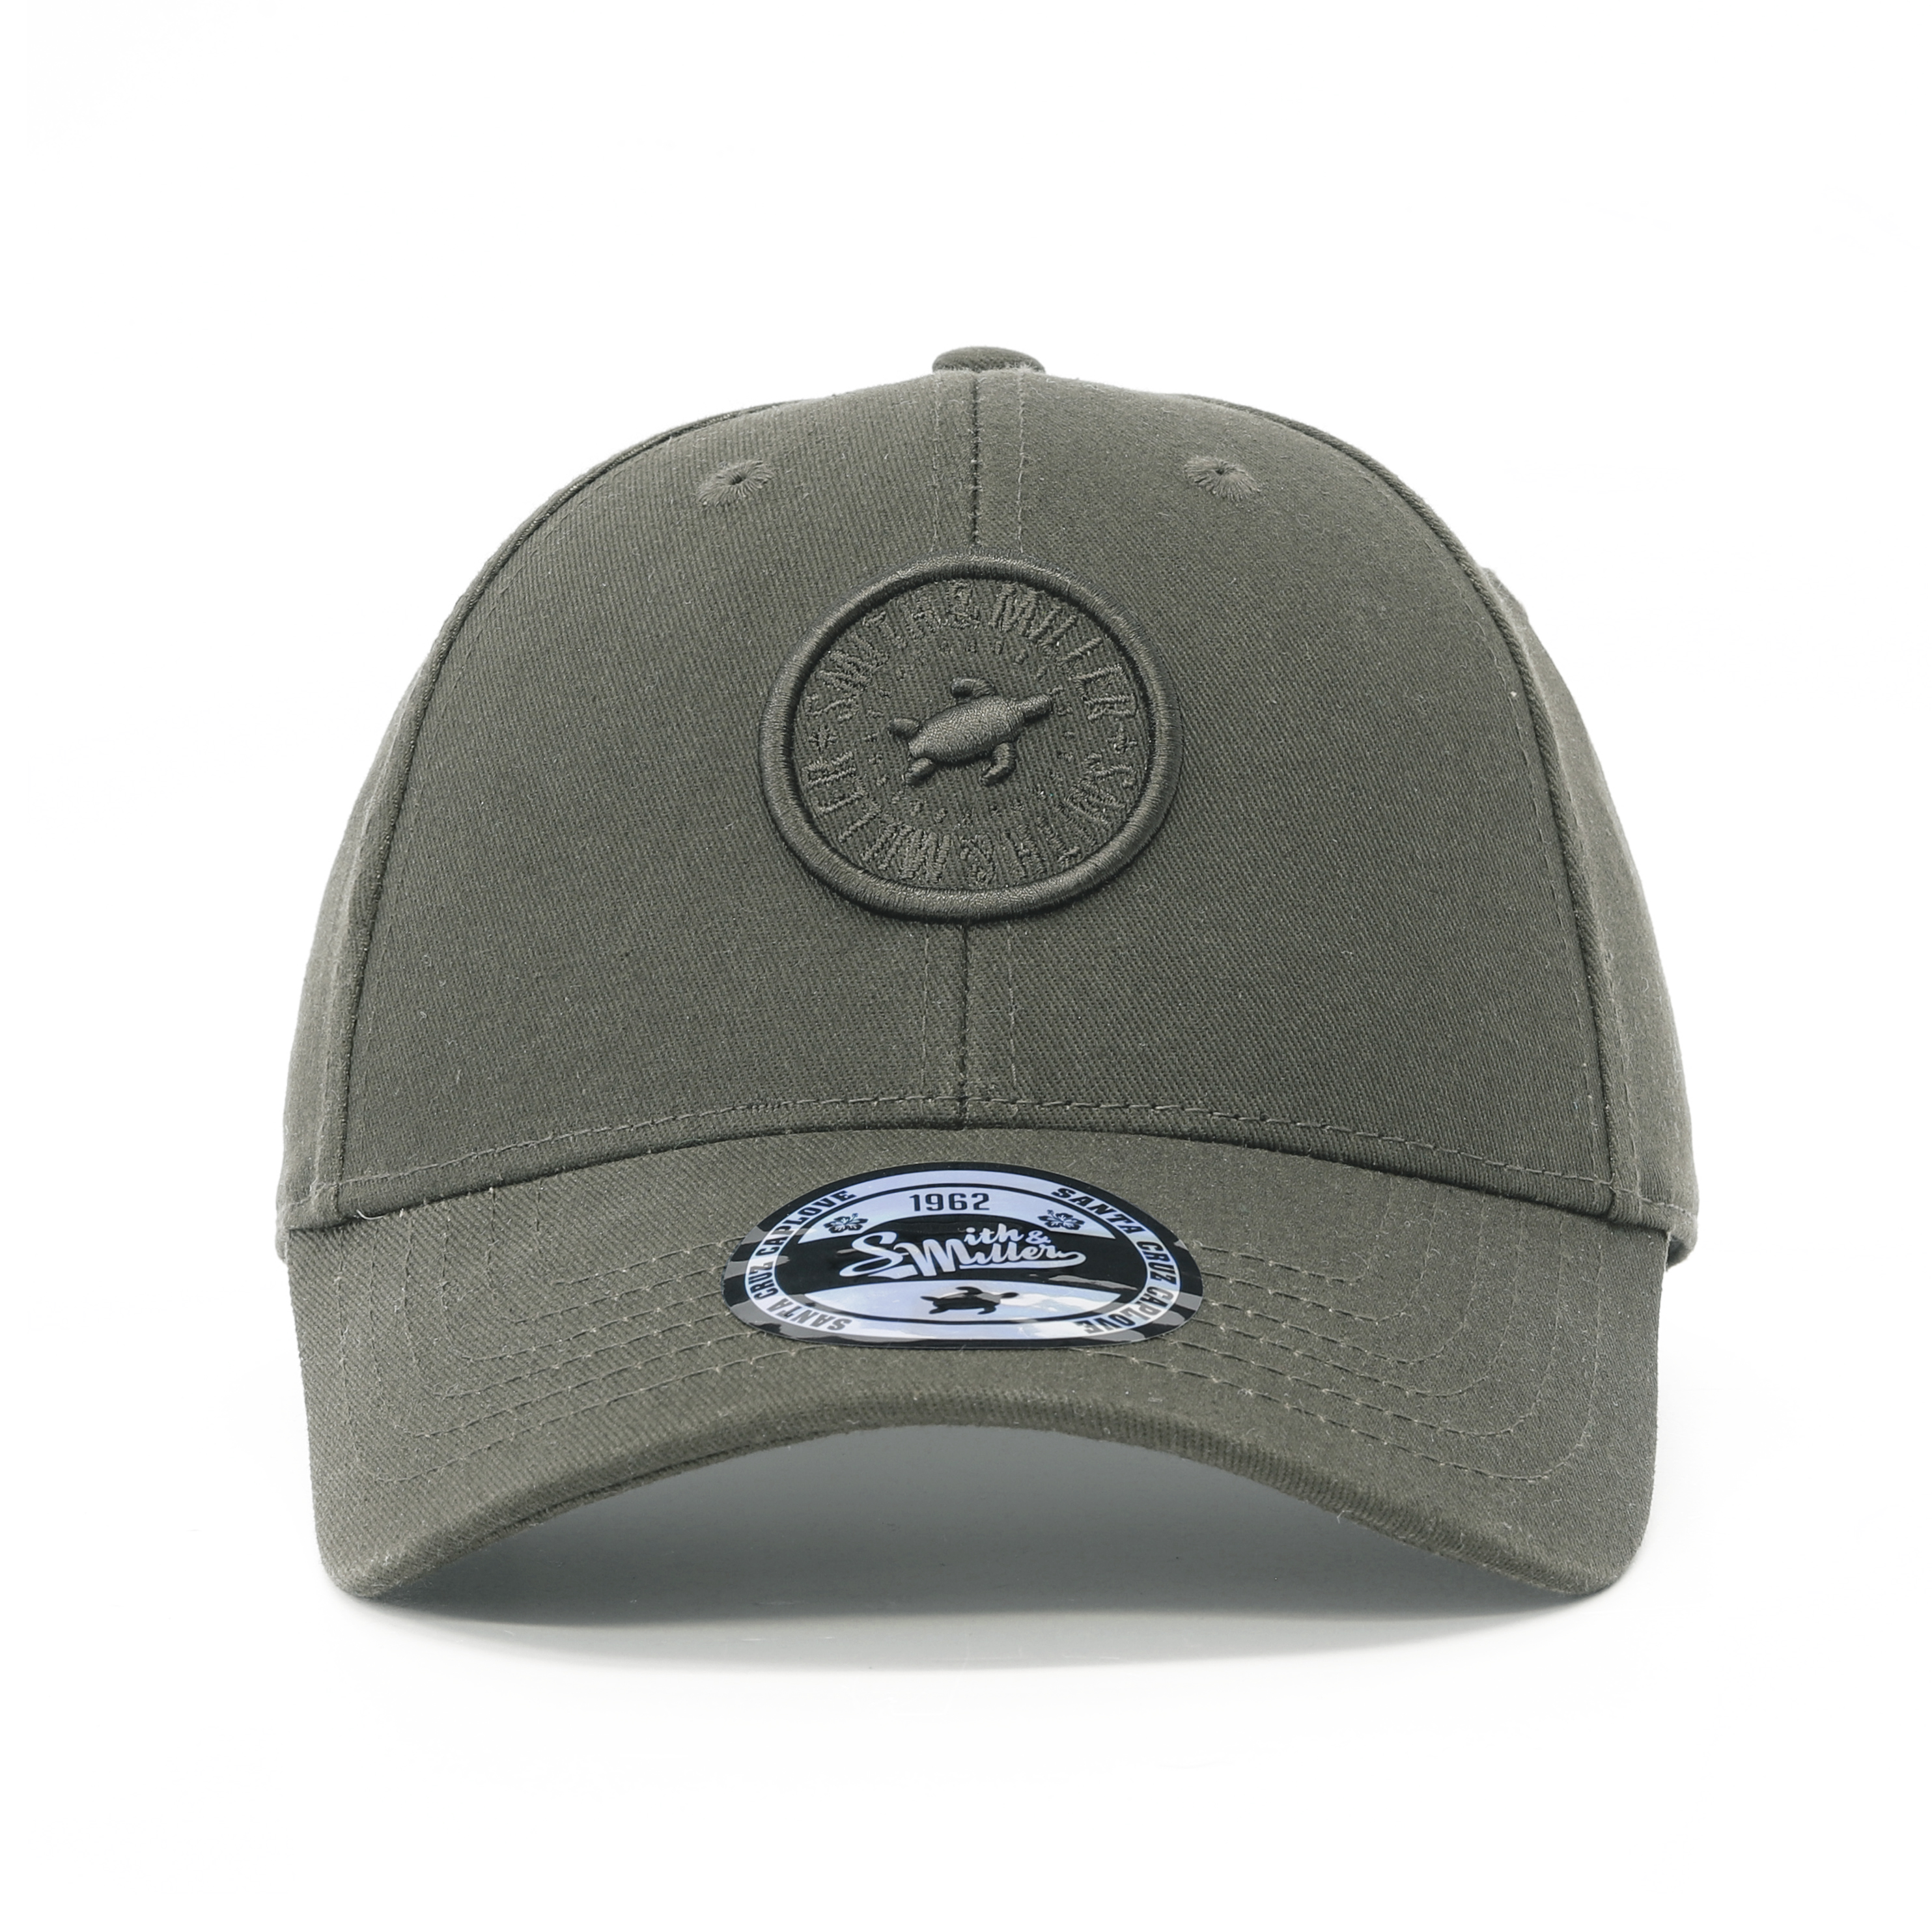 Smith & Miller Odesa Unisex Curved Cap, olive